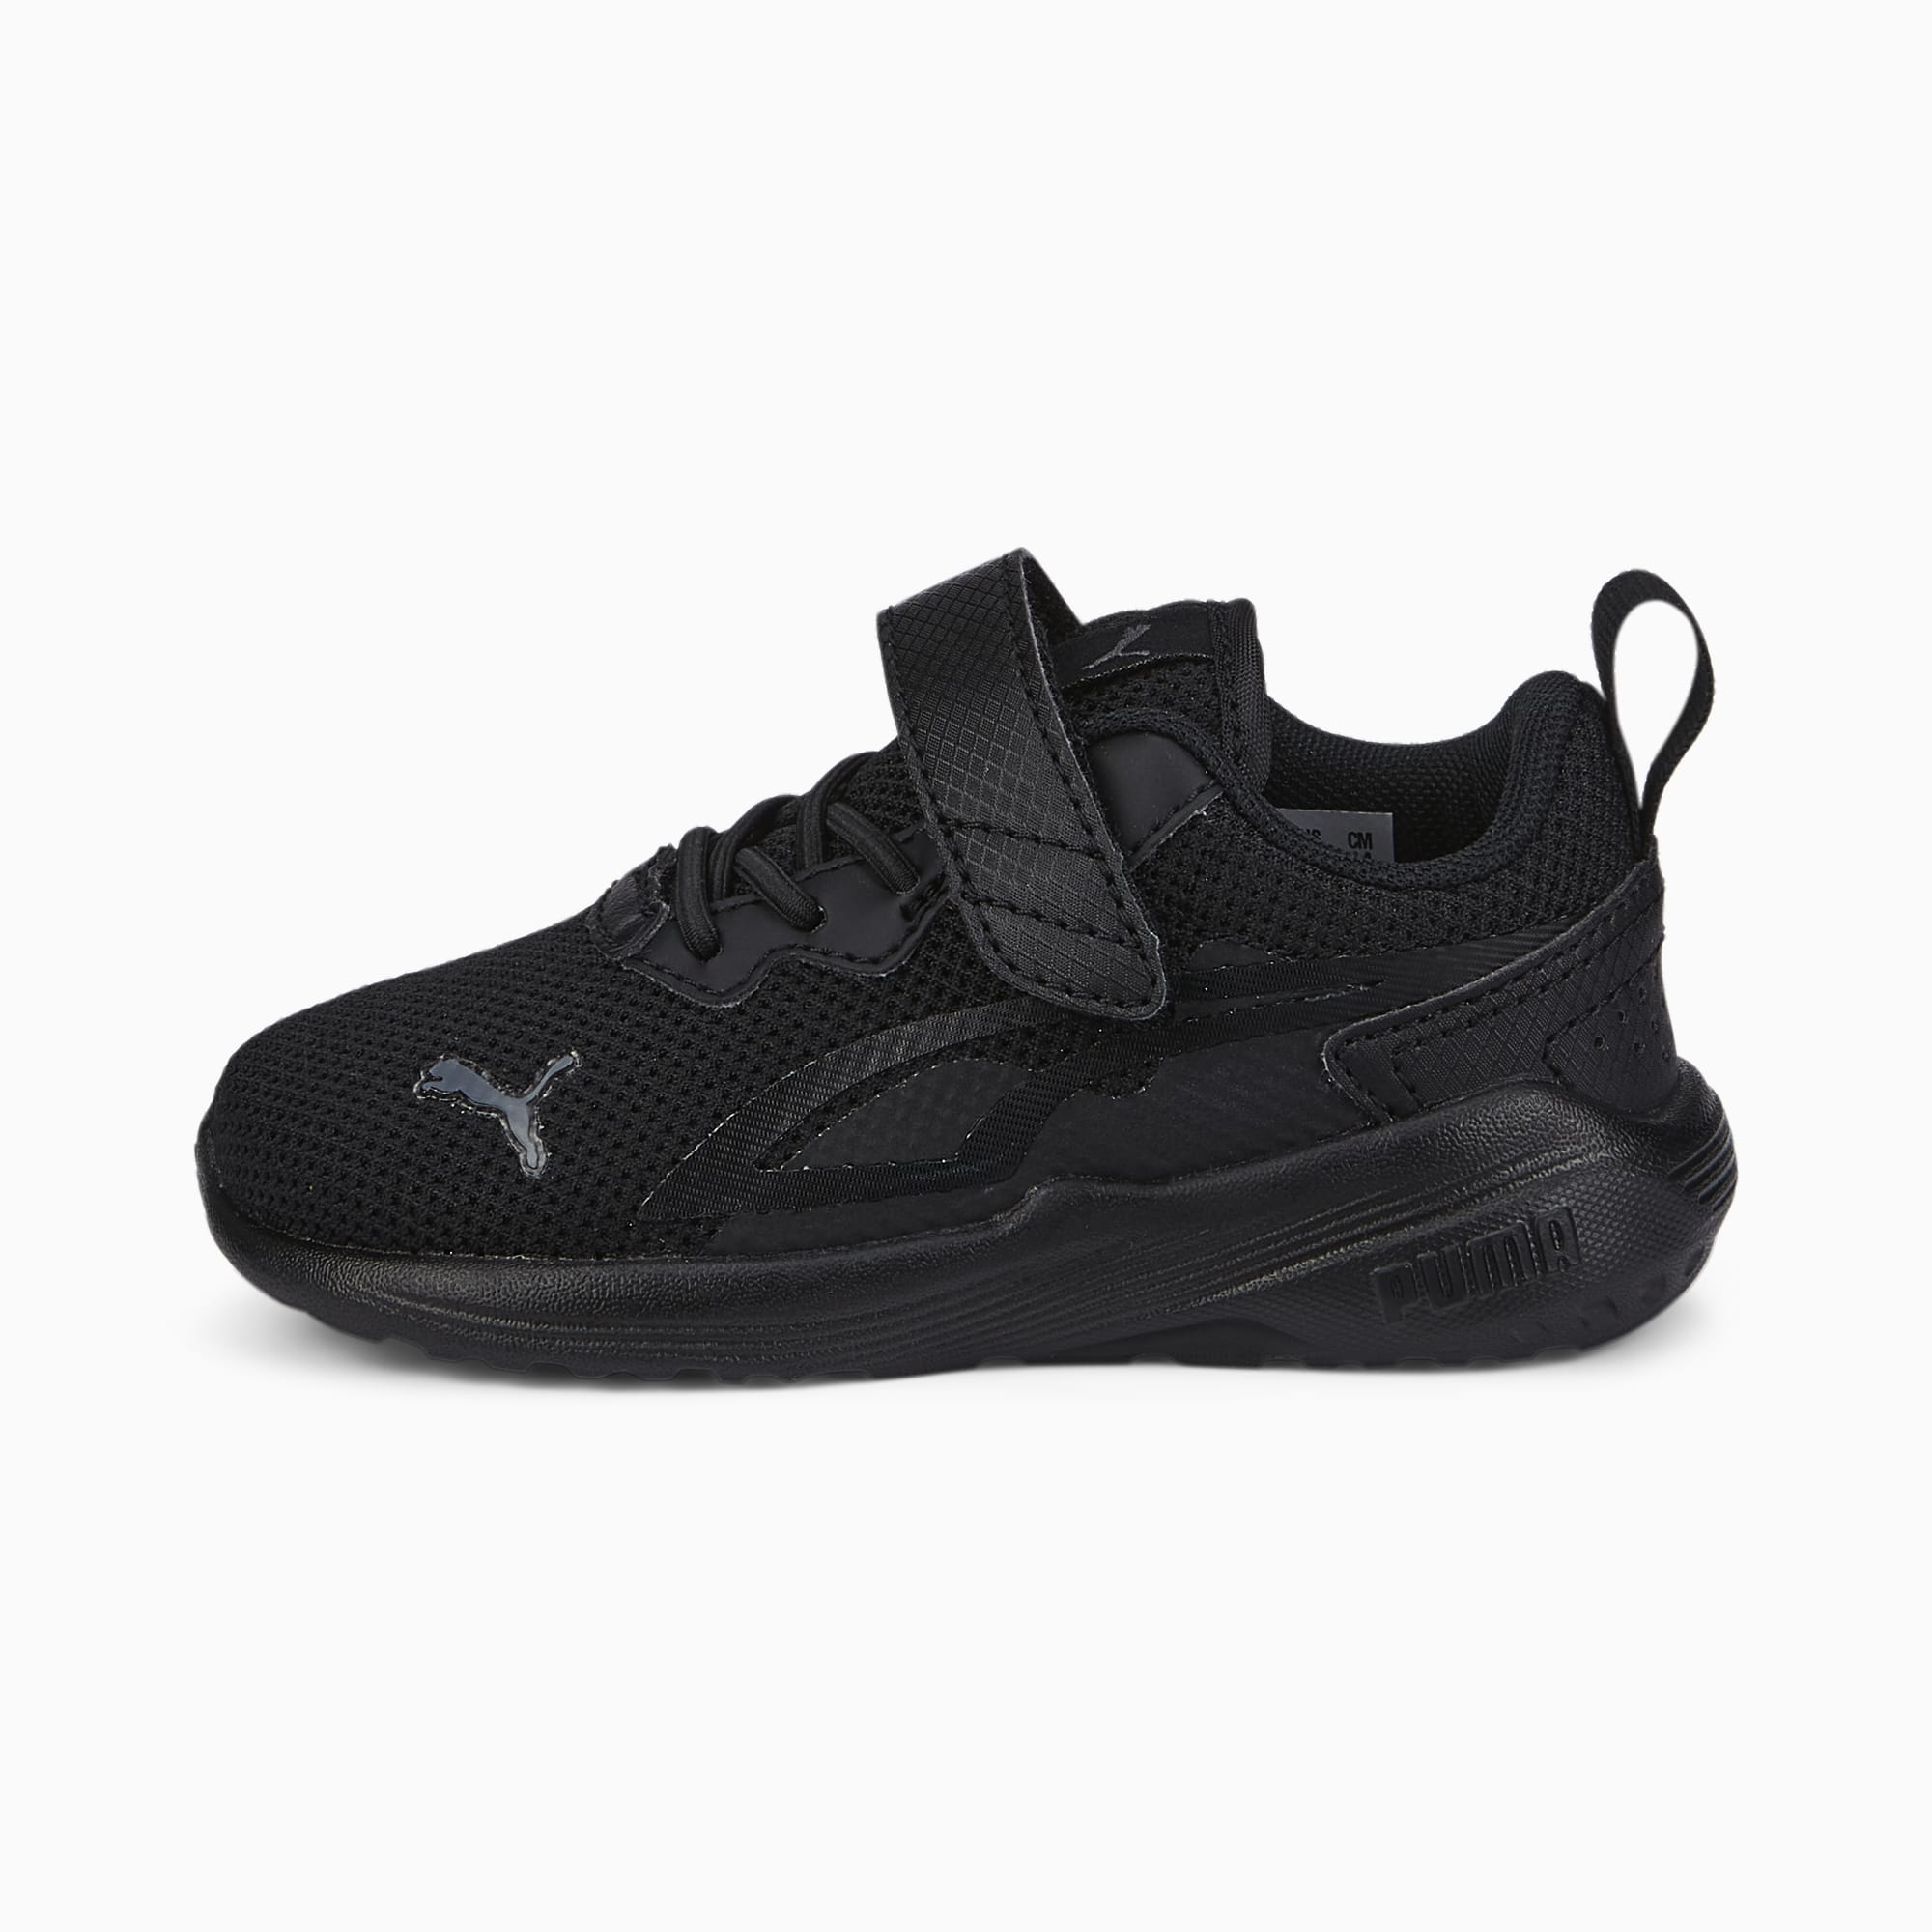 All-Day Active Alternative Closure Toddlers' Sneakers